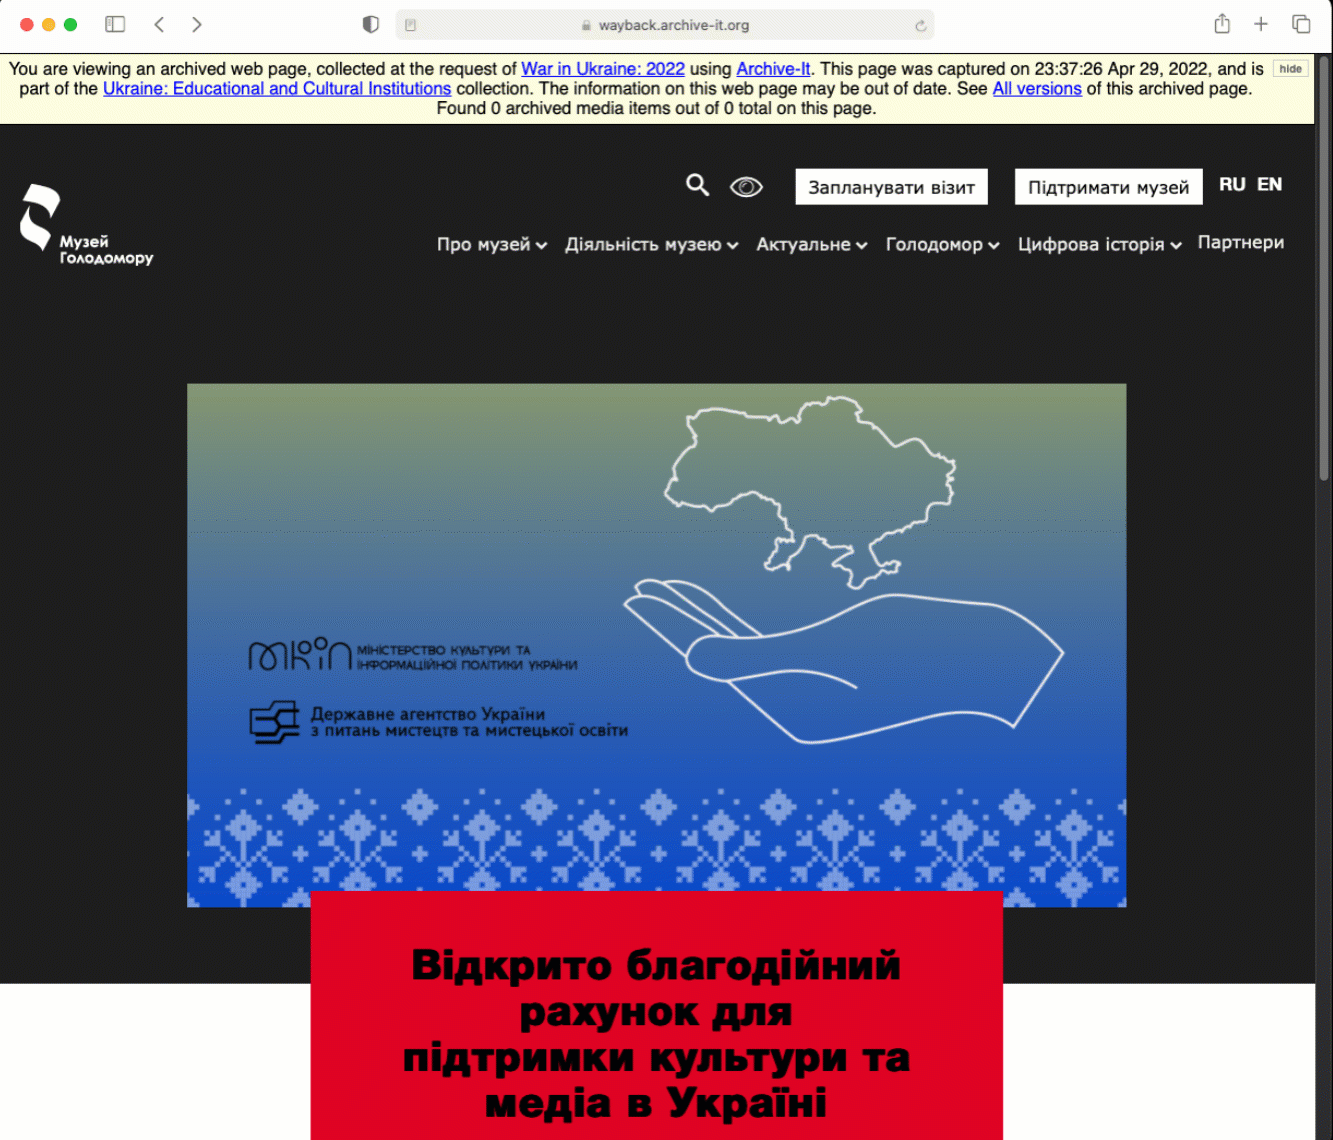 Screenshot of archived web page from the Holodomor-Genocide museum in Kyiv, Ukraine